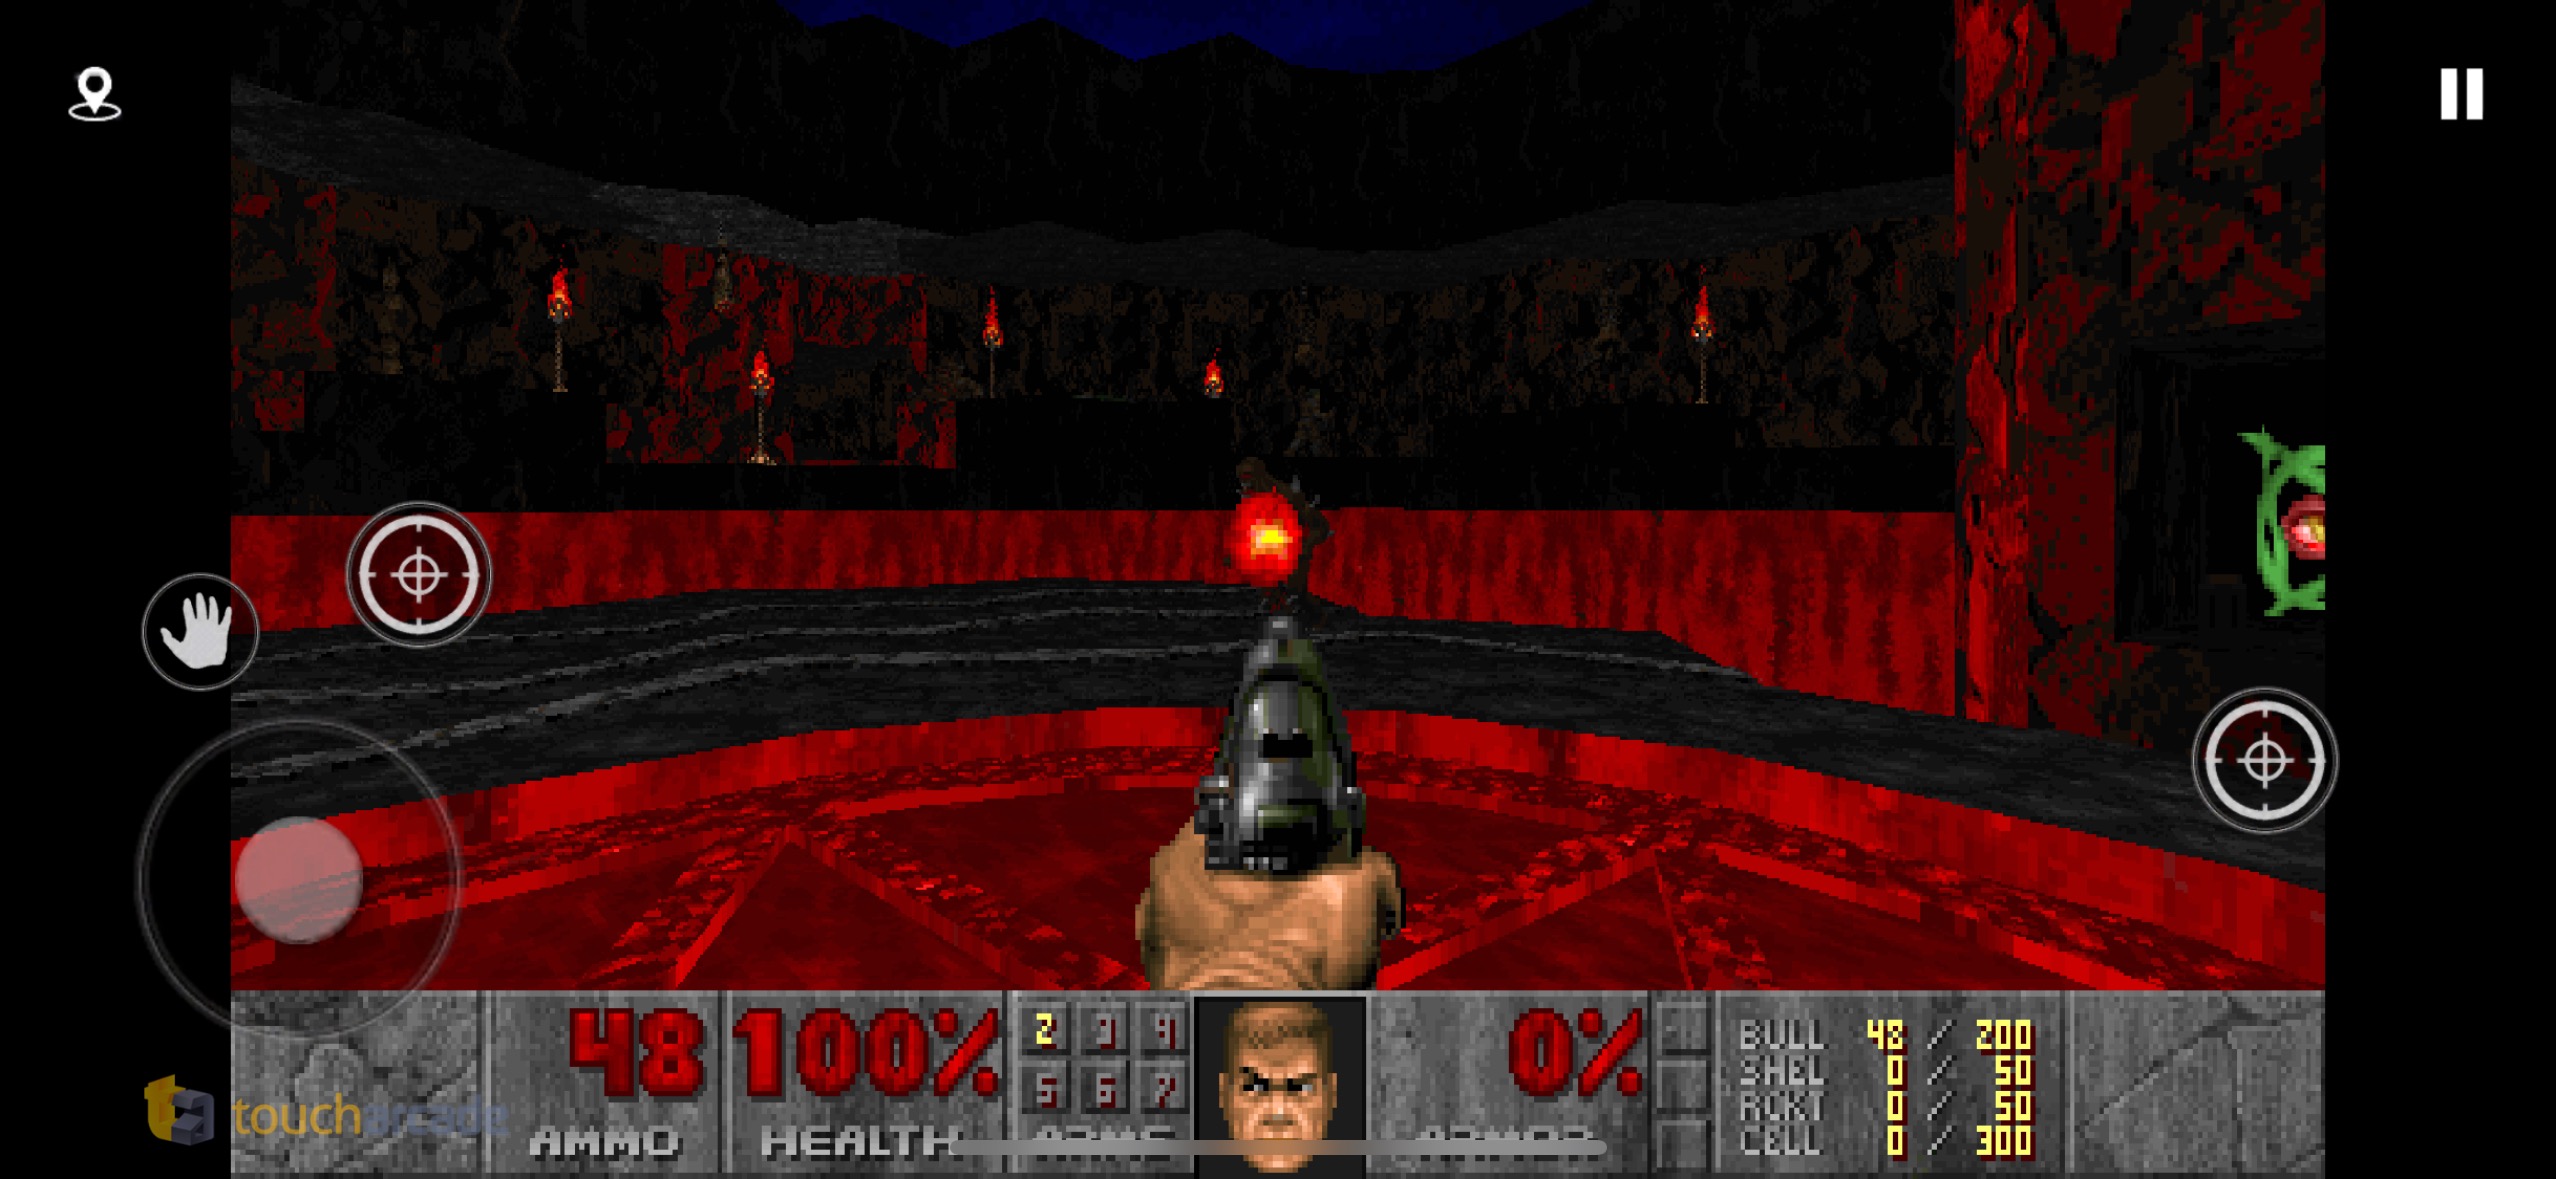 Sigil II, a brand-new unofficial 6th episode for Doom by John Romero,  coming December 10th